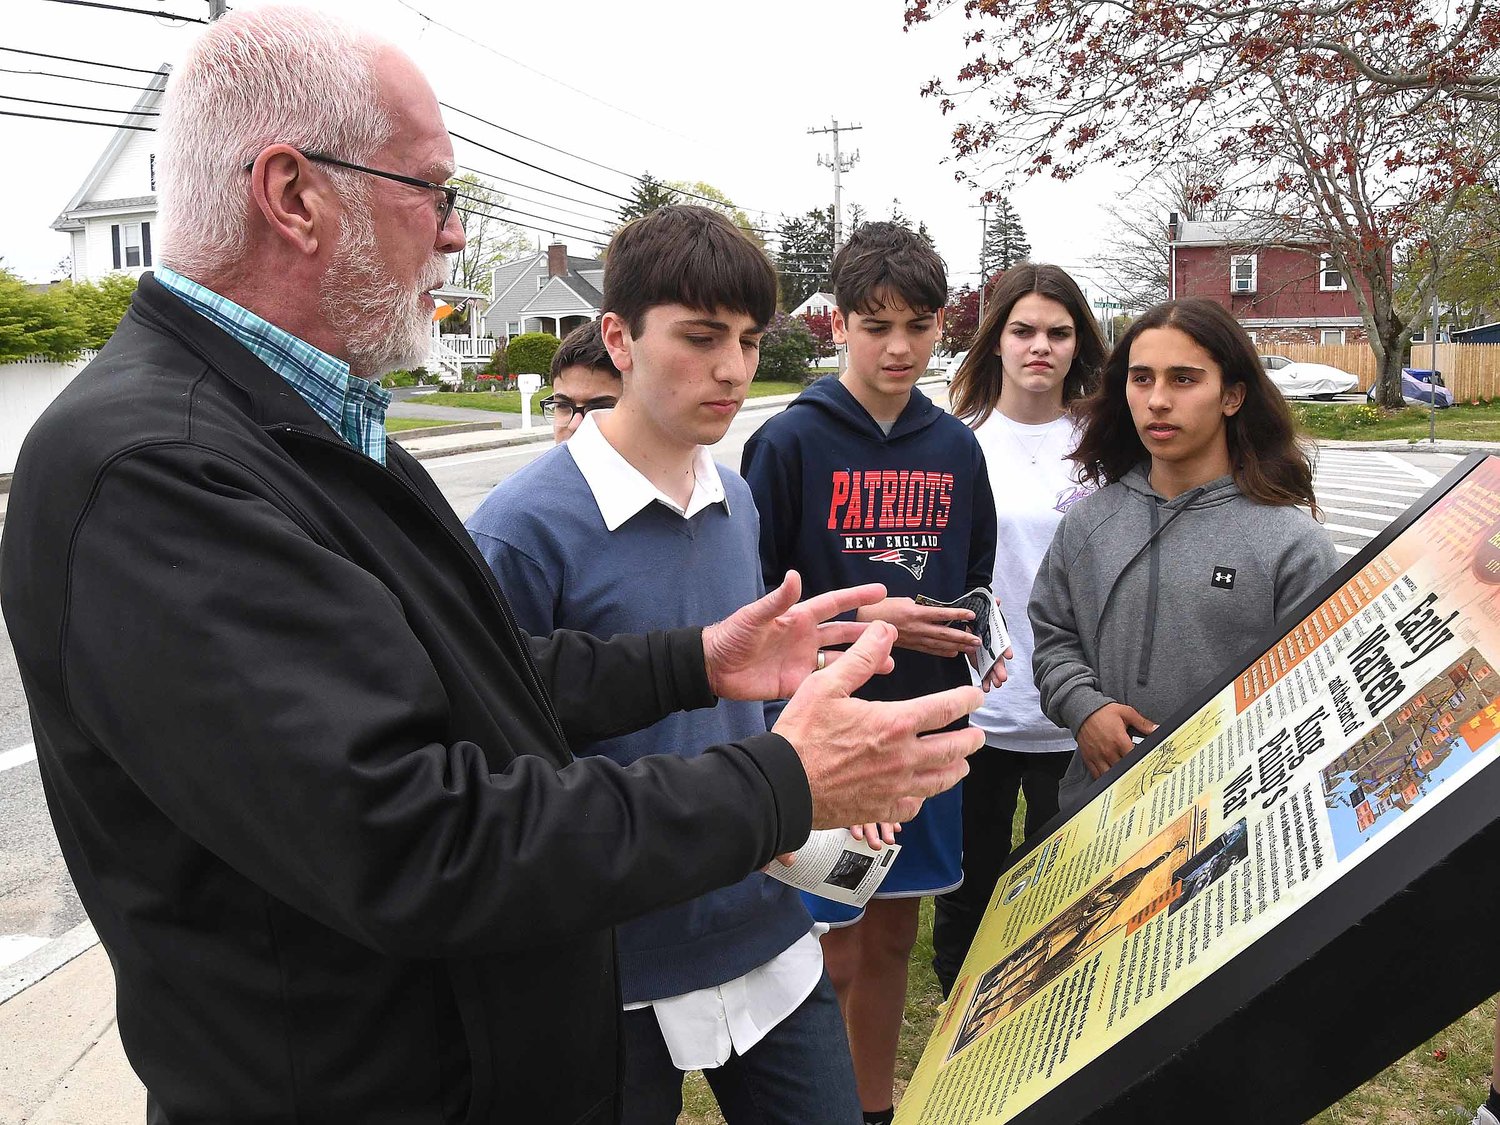 Kickemuit Middle School Principal Dennis Morrell explains some of the history of the location to students.